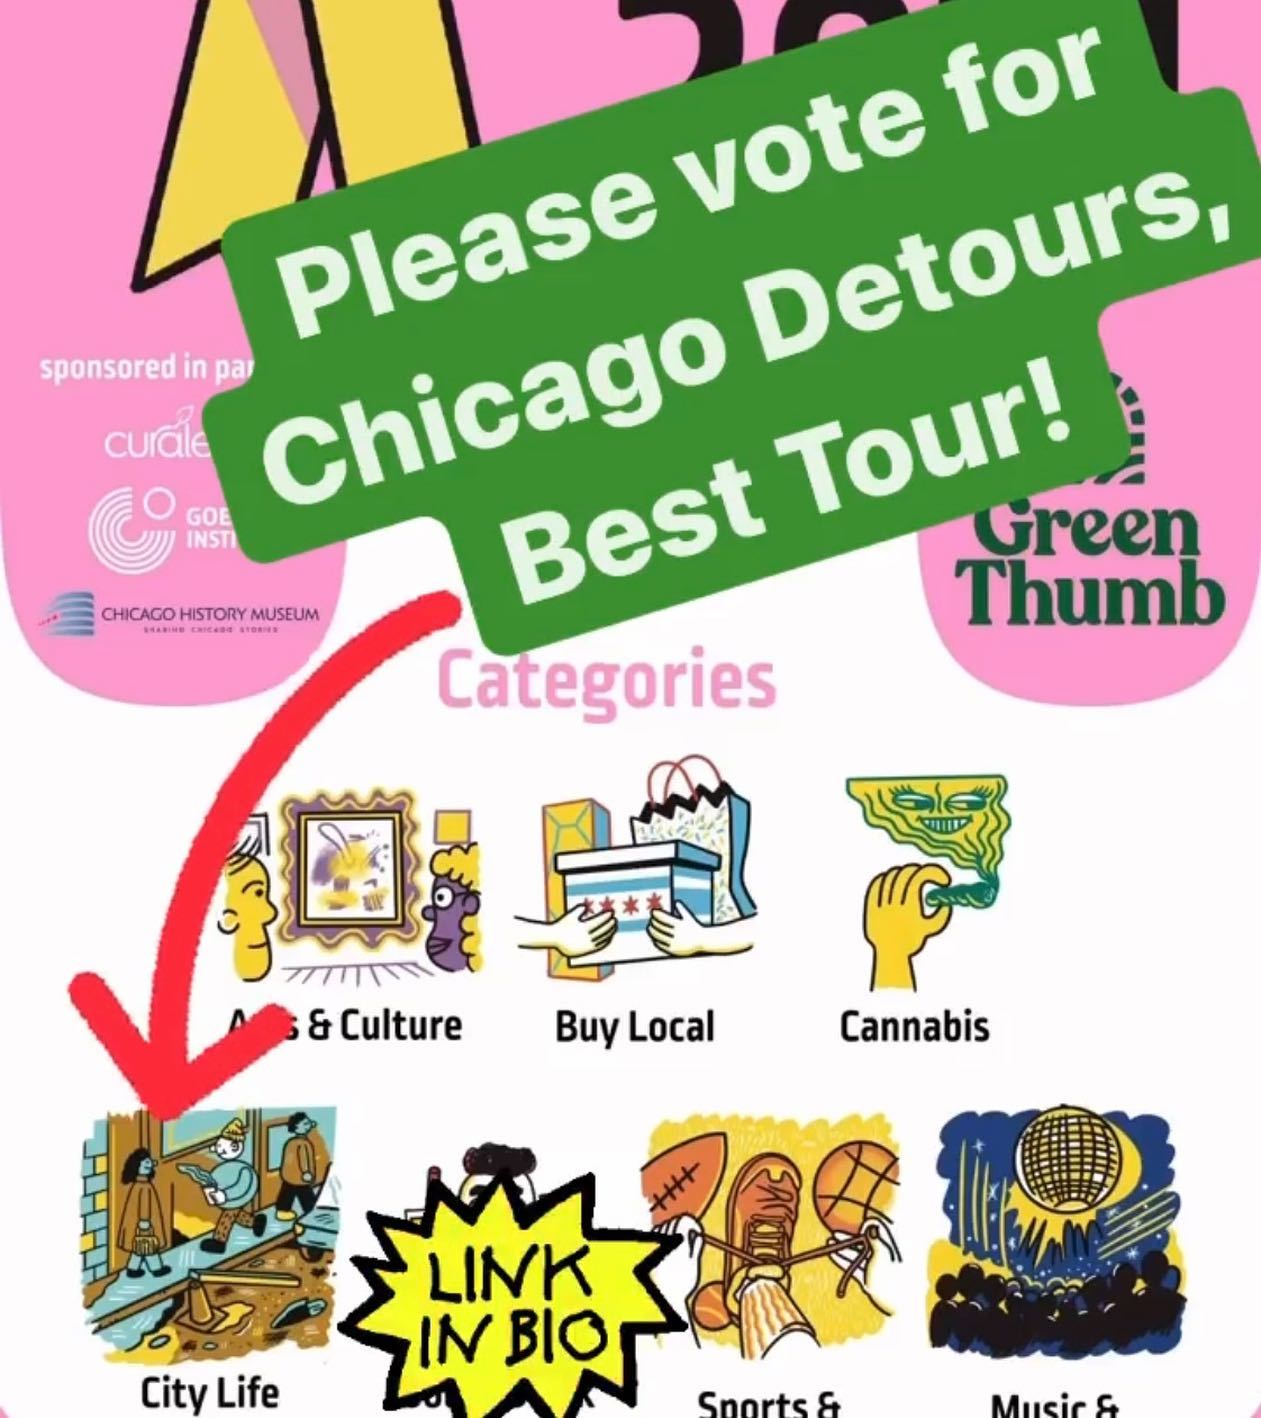 Voting ends at noon today for the @chicago_reader “Best of Chicago” poll. We are up for “Best Tour” which you can find by scrolling down about two-thirds of the City Life category. It takes about a minute to do. Your support is super appreciated!